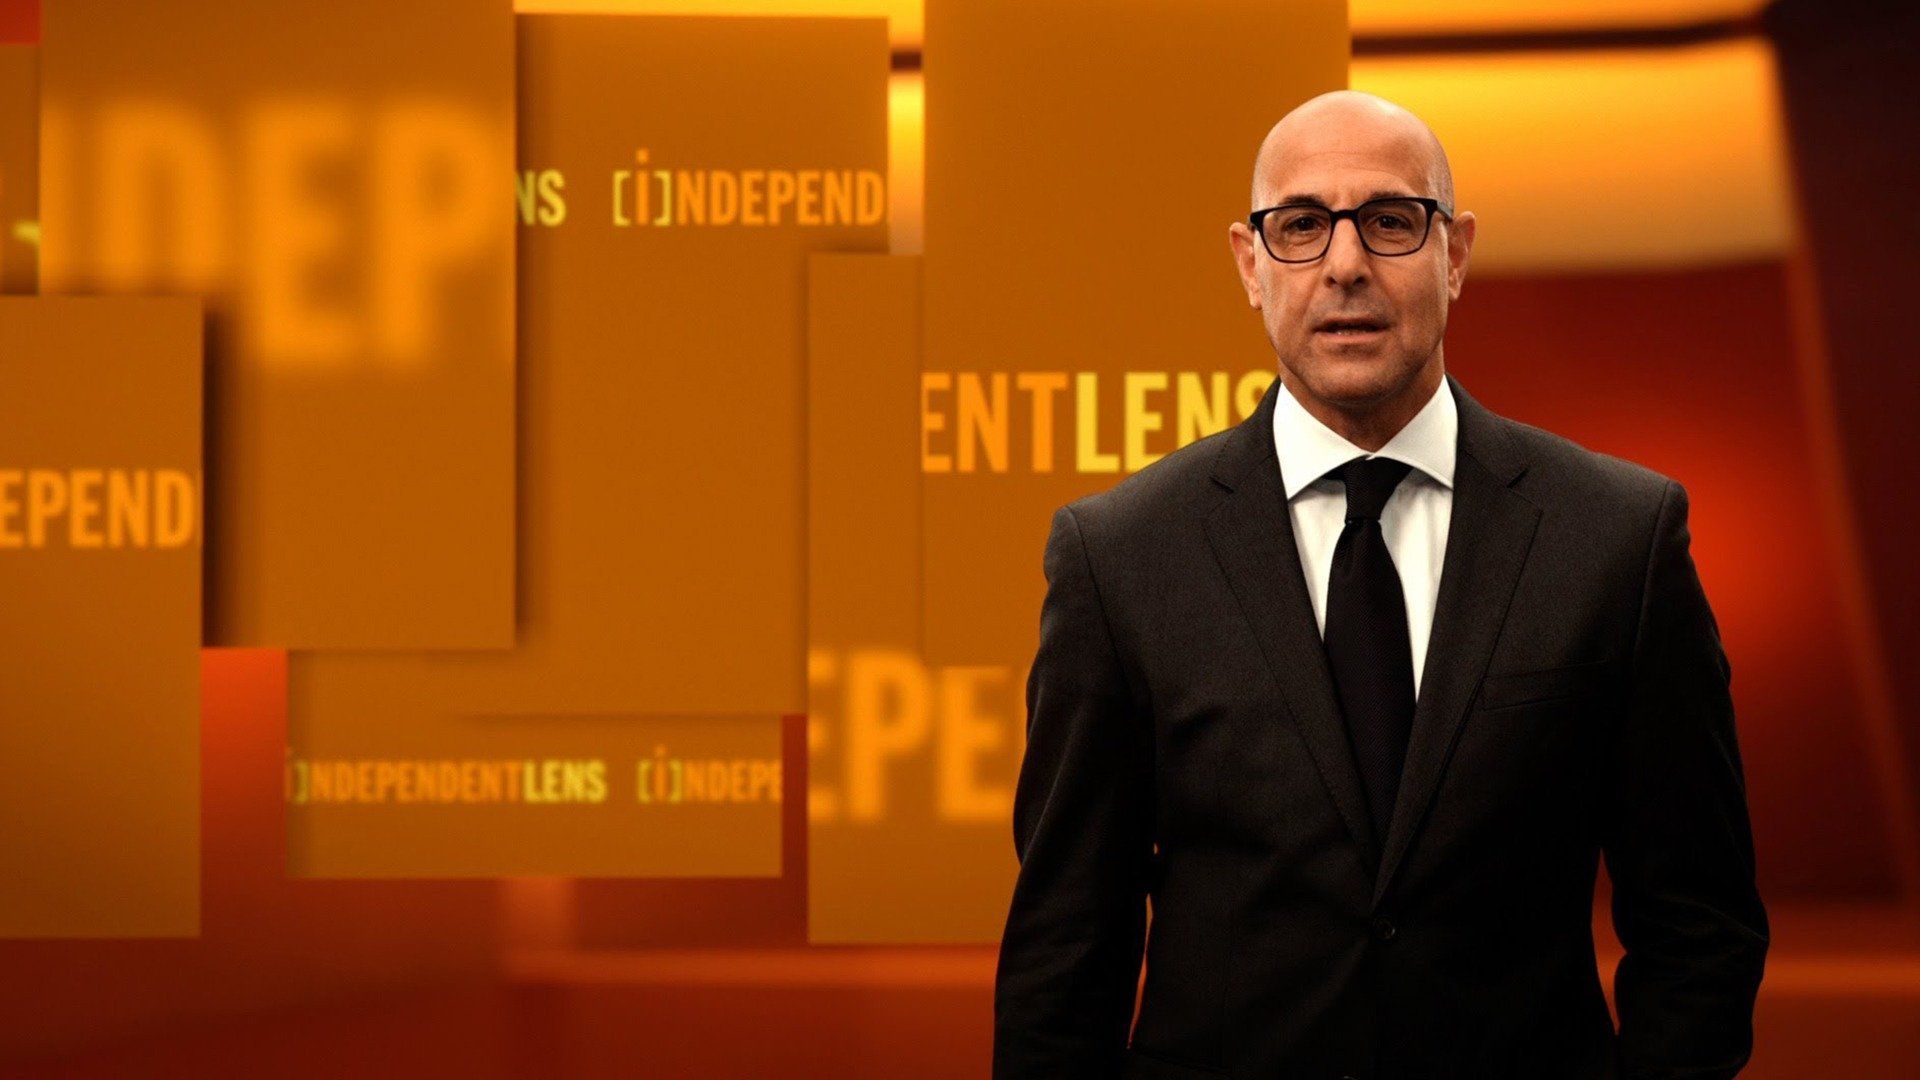 Stanley Tucci: Searching for Italy background